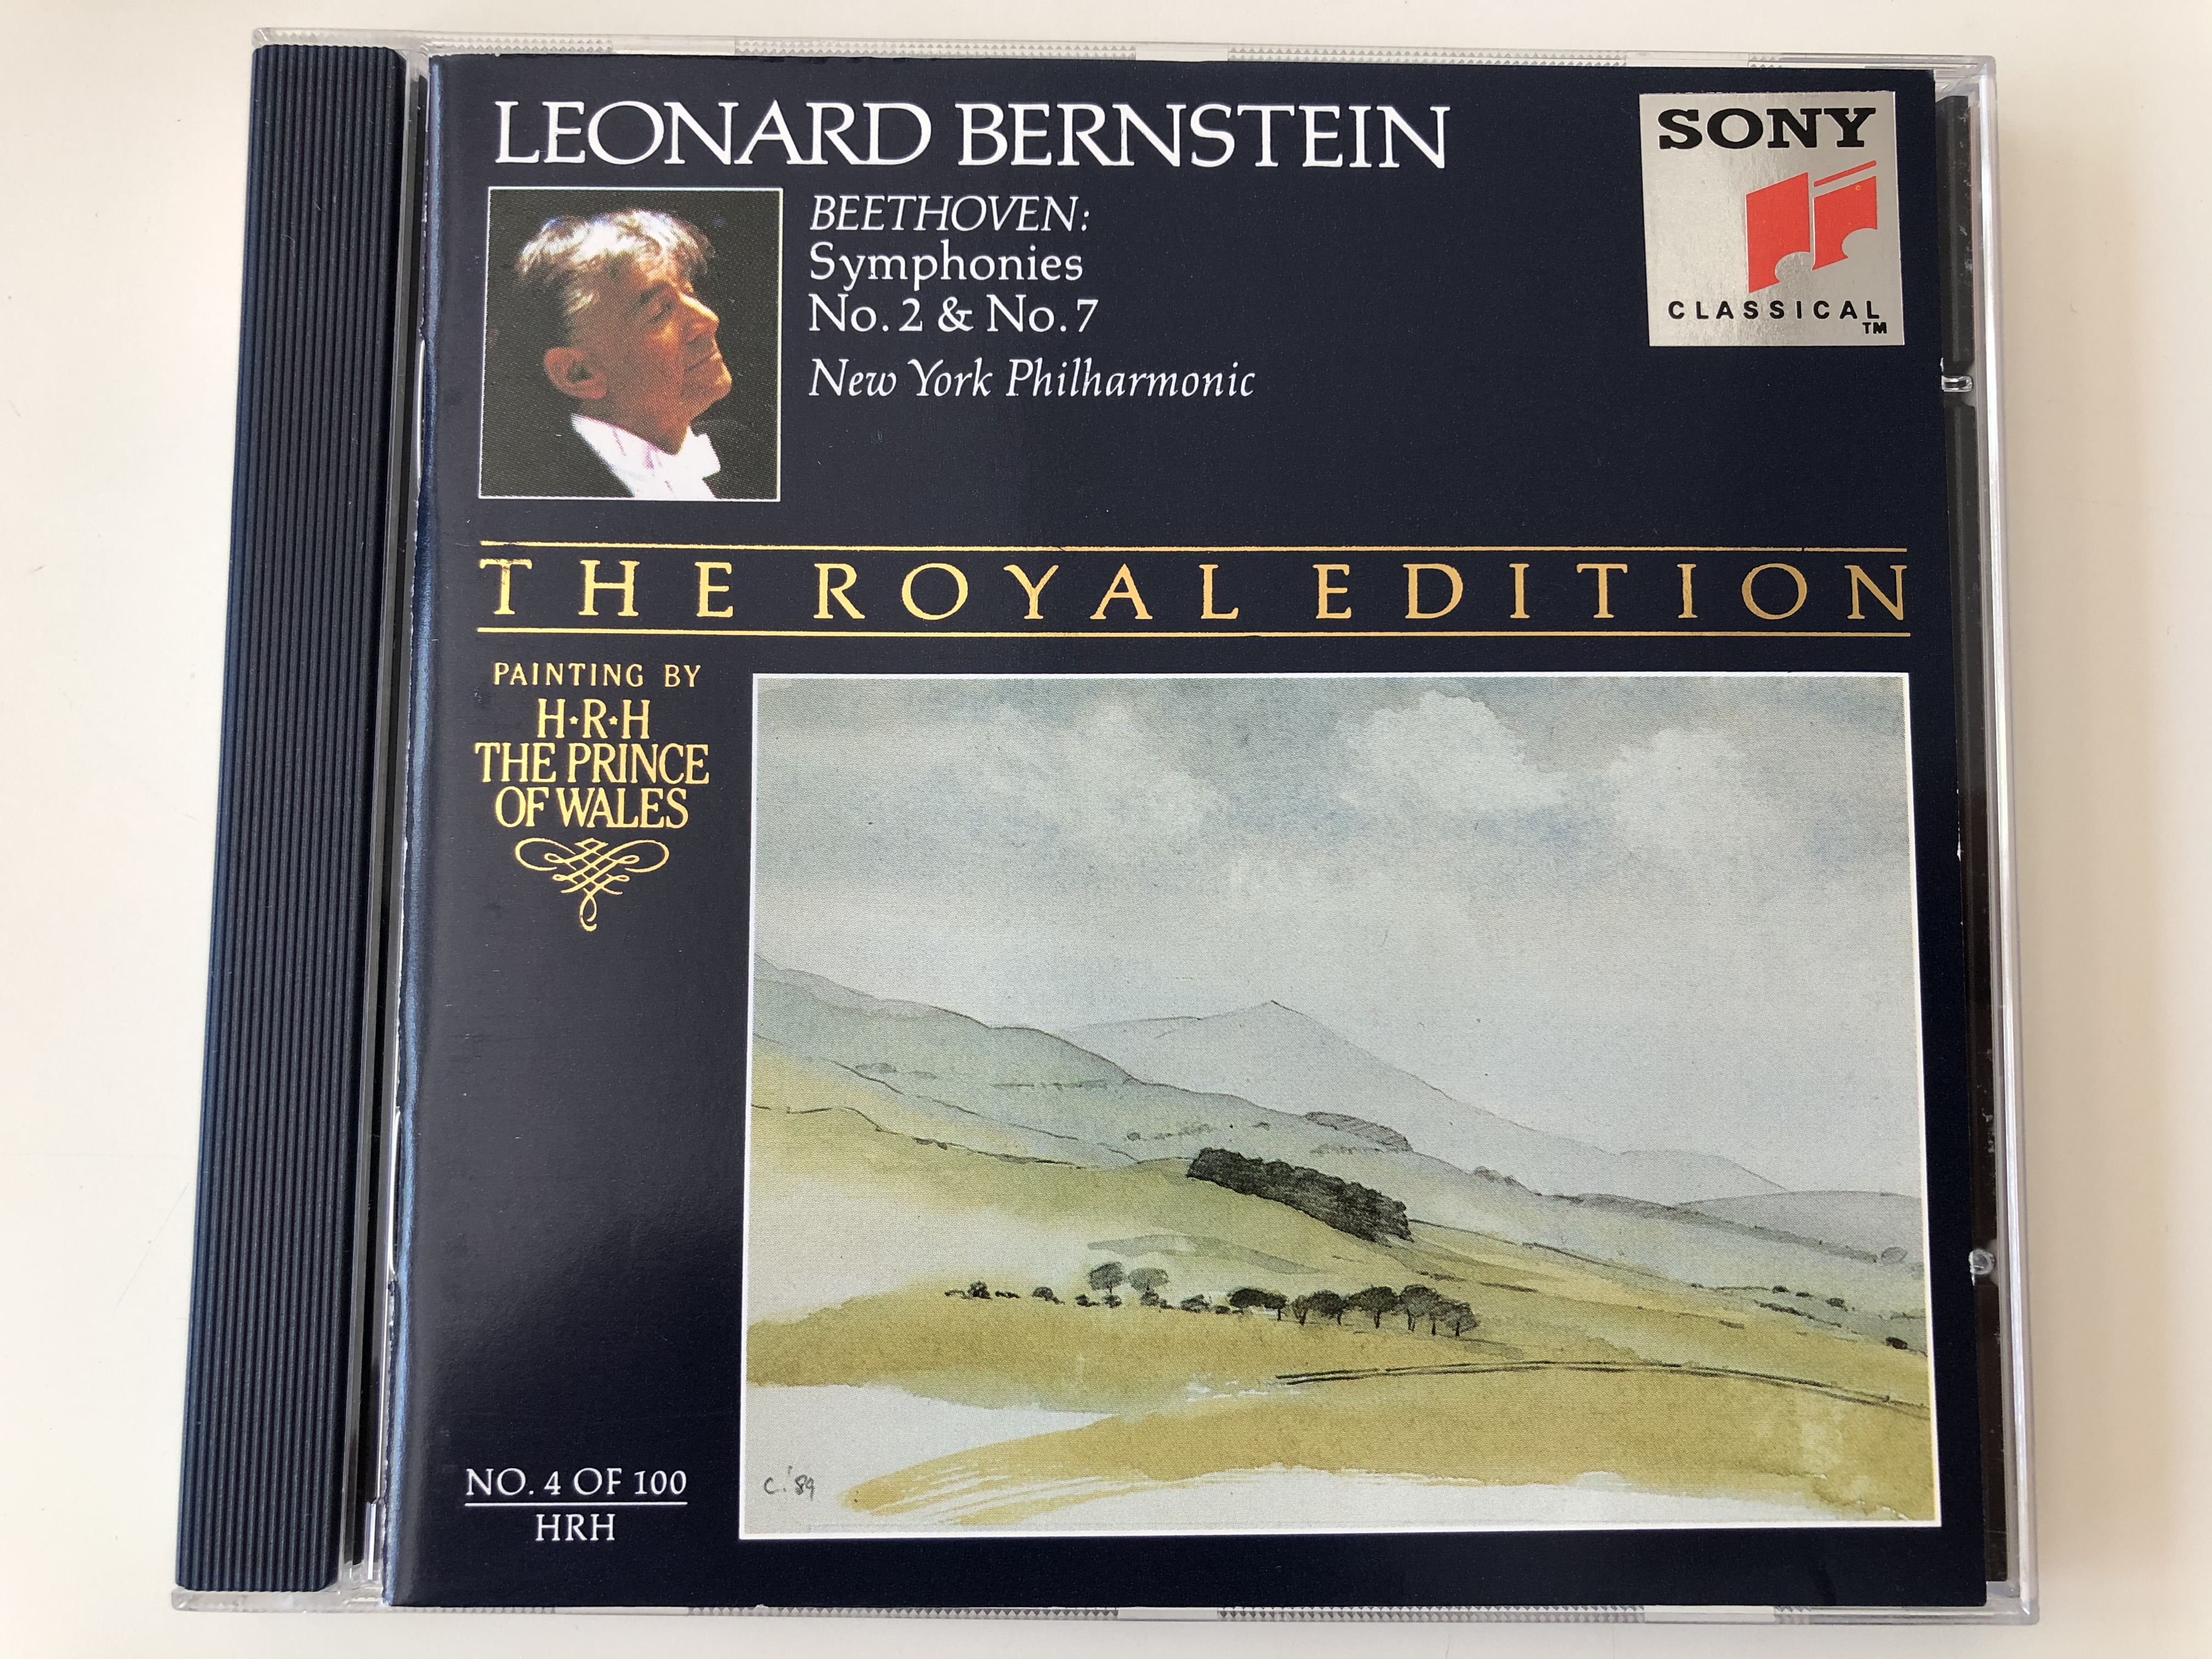 leonard-bernstein-beethoven-symphonies-no.-2-no.-7-new-york-philharmonic-the-royal-edition-painting-by-h.-r.-h.-the-prince-of-wales-no.-4-of-100-sony-classical-audio-cd-1992-smk-47515-1-.jpg